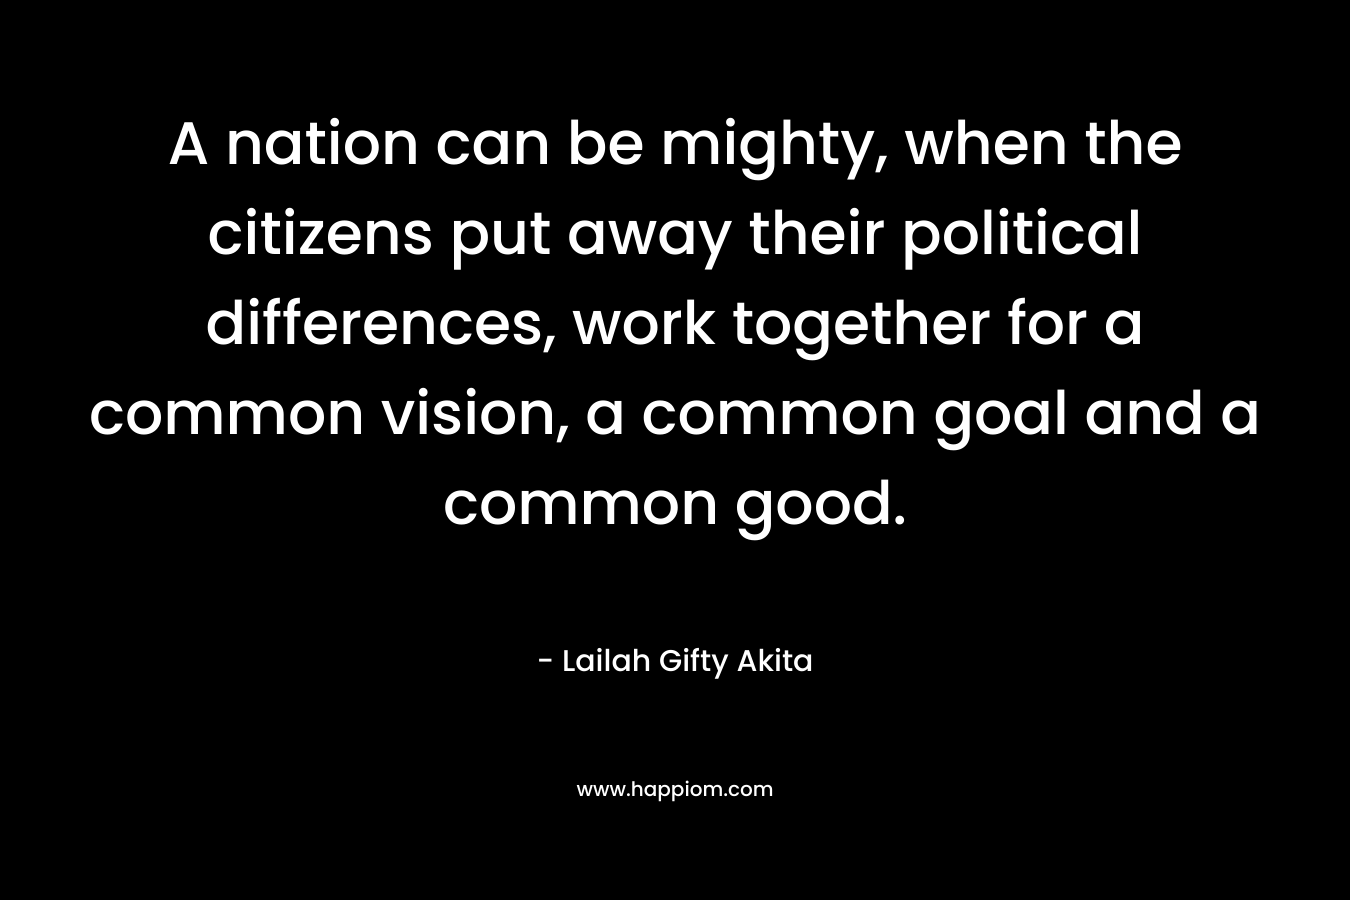 A nation can be mighty, when the citizens put away their political differences, work together for a common vision, a common goal and a common good. – Lailah Gifty Akita